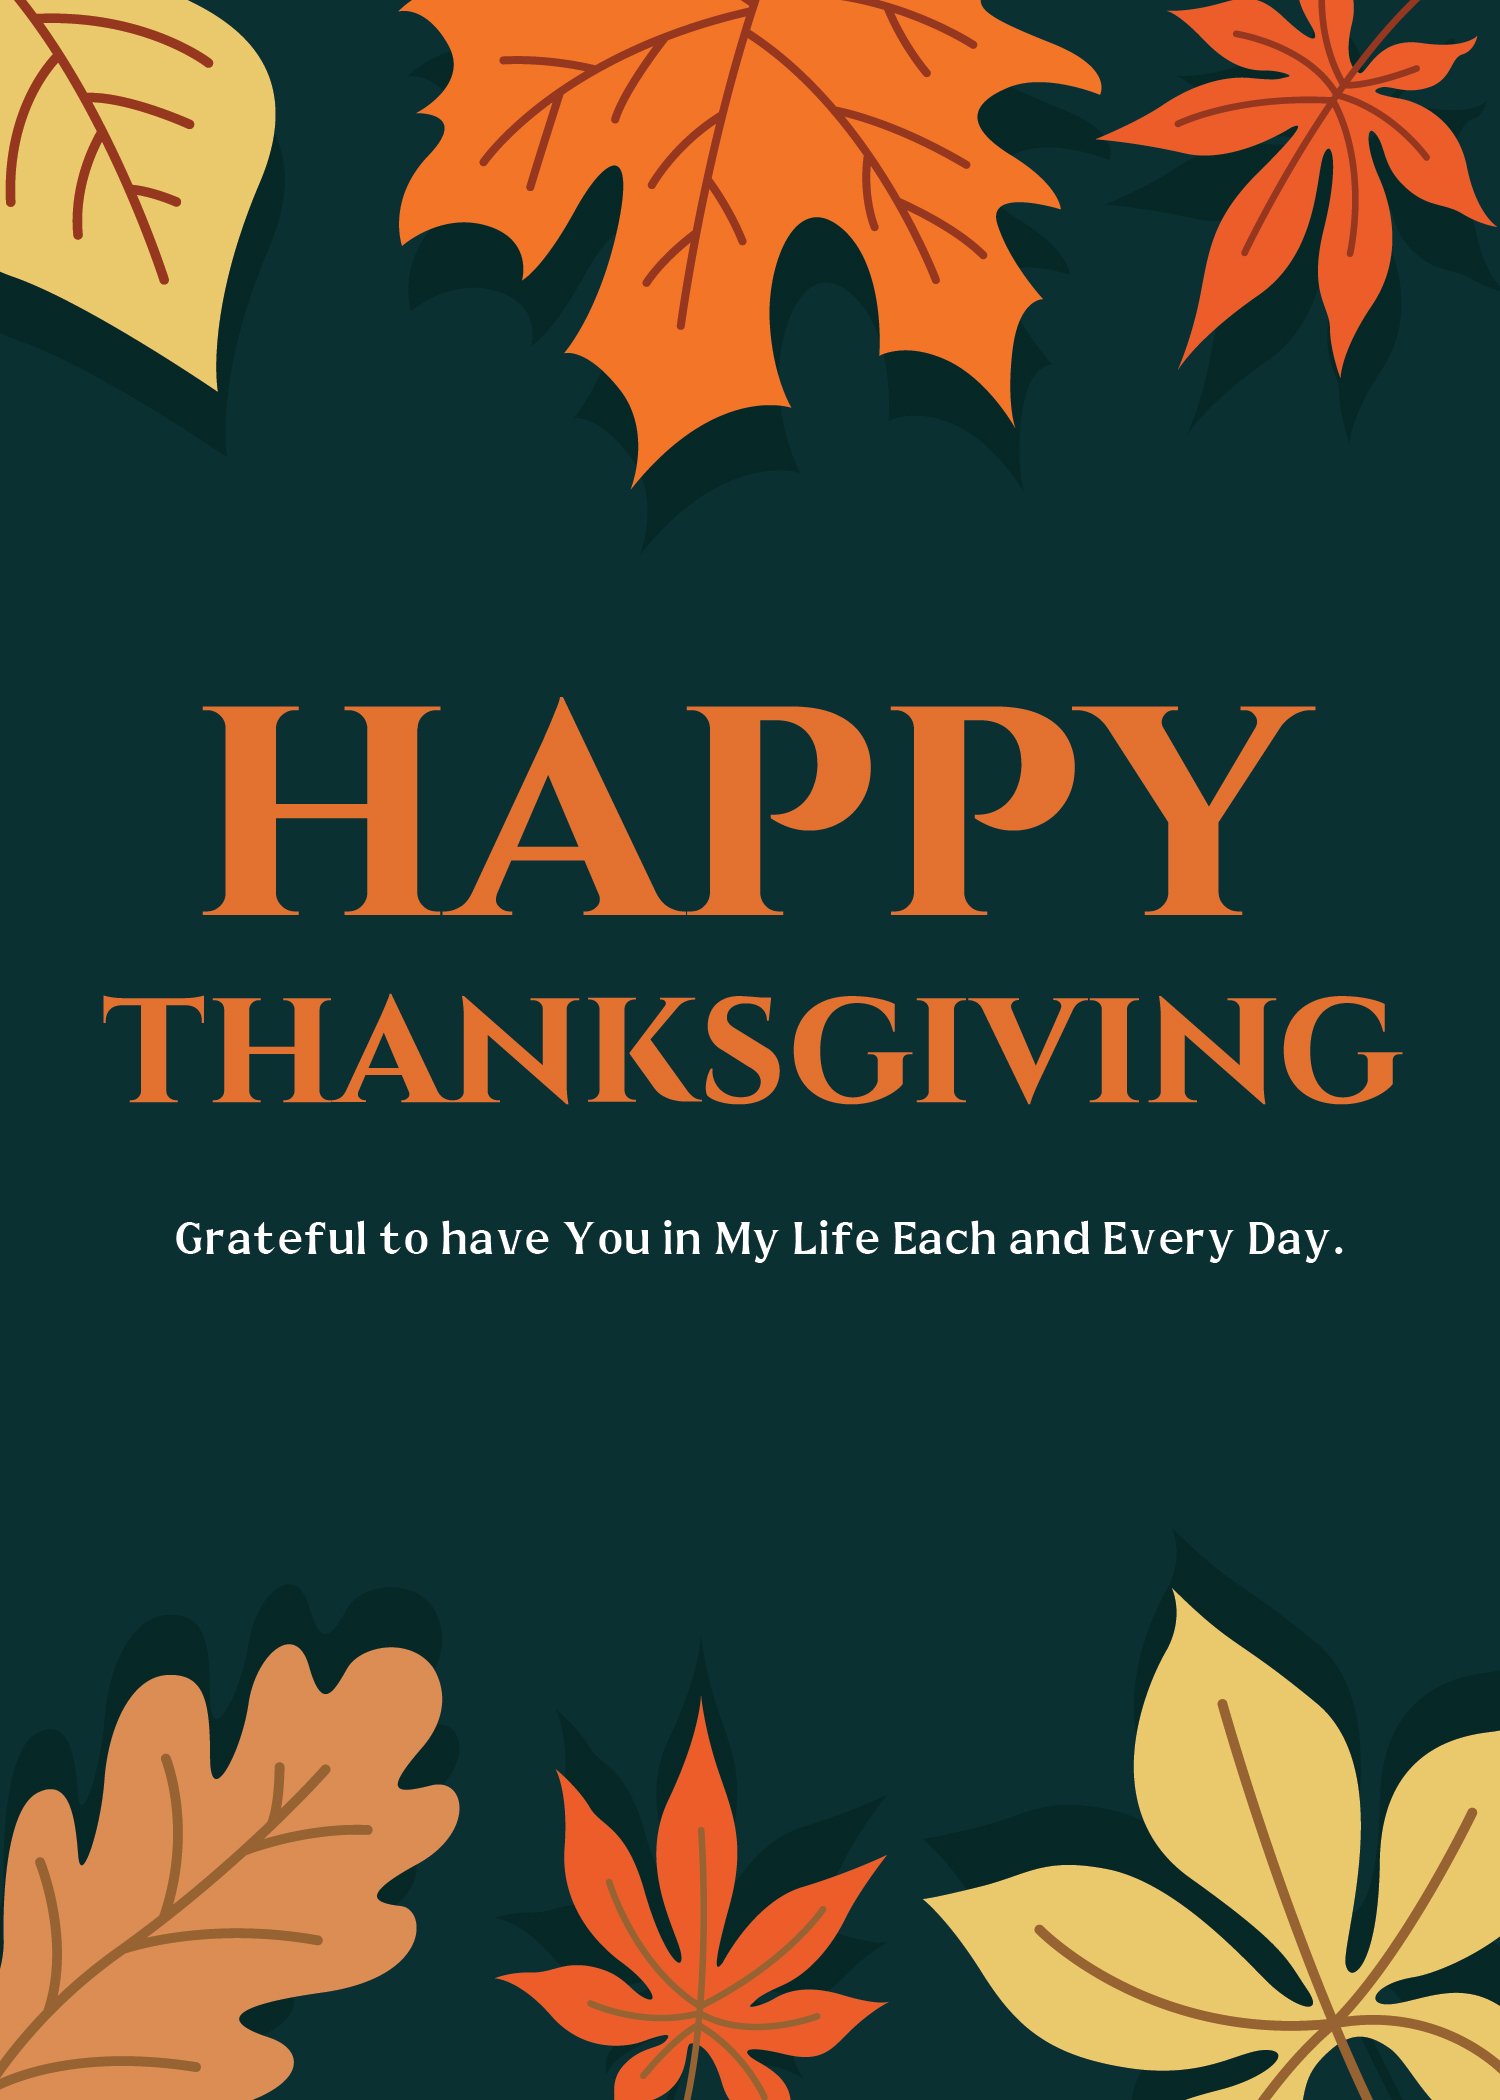 Free Thanksgiving Day Best Wishes in Word, Google Docs, Illustrator, PSD, Apple Pages, Publisher, EPS, SVG, JPG, PNG